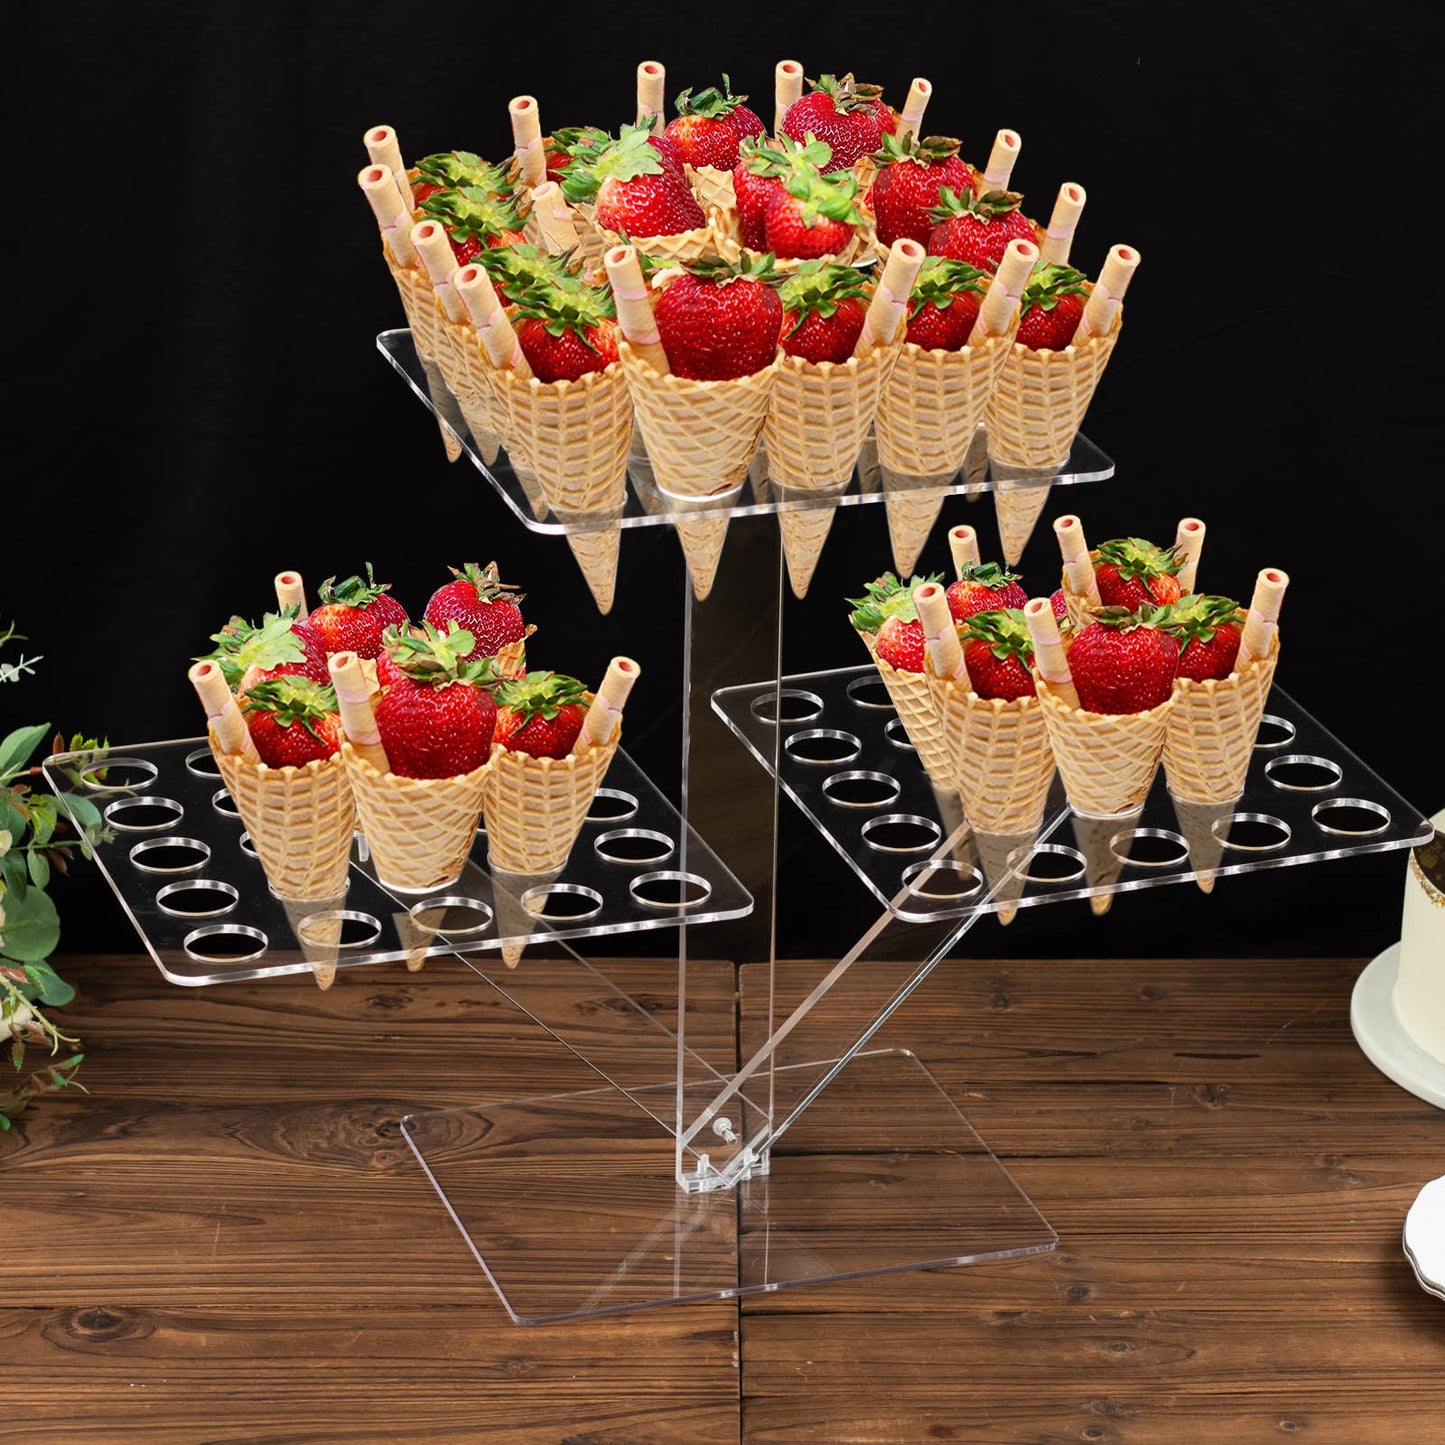 18" Tall Clear 3-Tier Acrylic 72-Slot Ice Cream Cone Shot Glass Tray, Foldable Plastic Mini Cupcake Display Stand